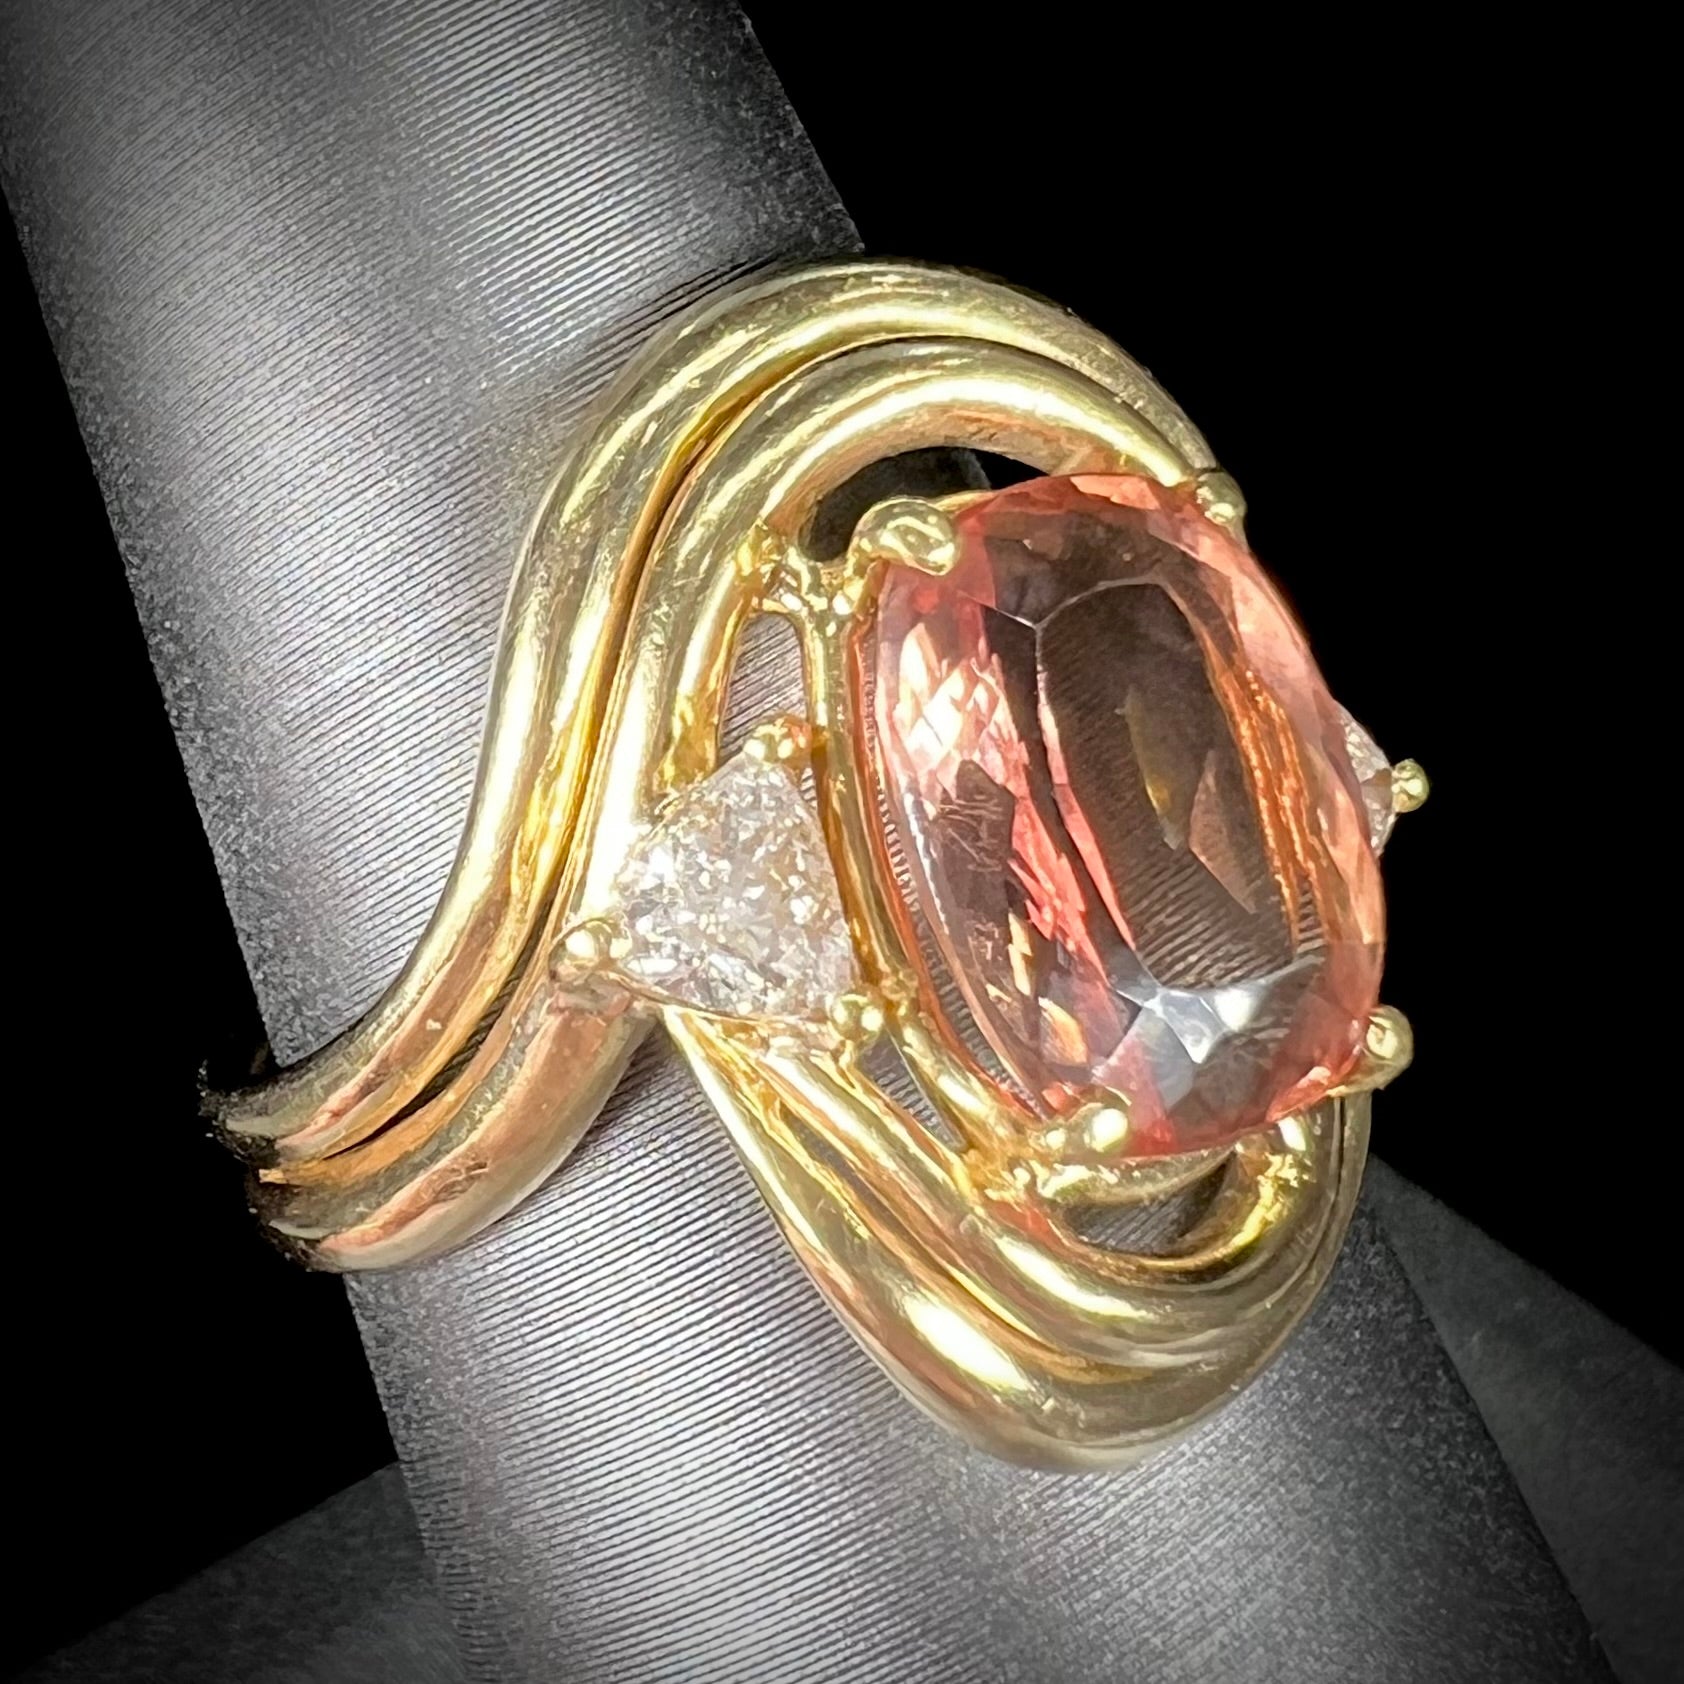 An 18 karat yellow gold ring set with two triangle cut diamonds and a cushion cut imperial topaz.